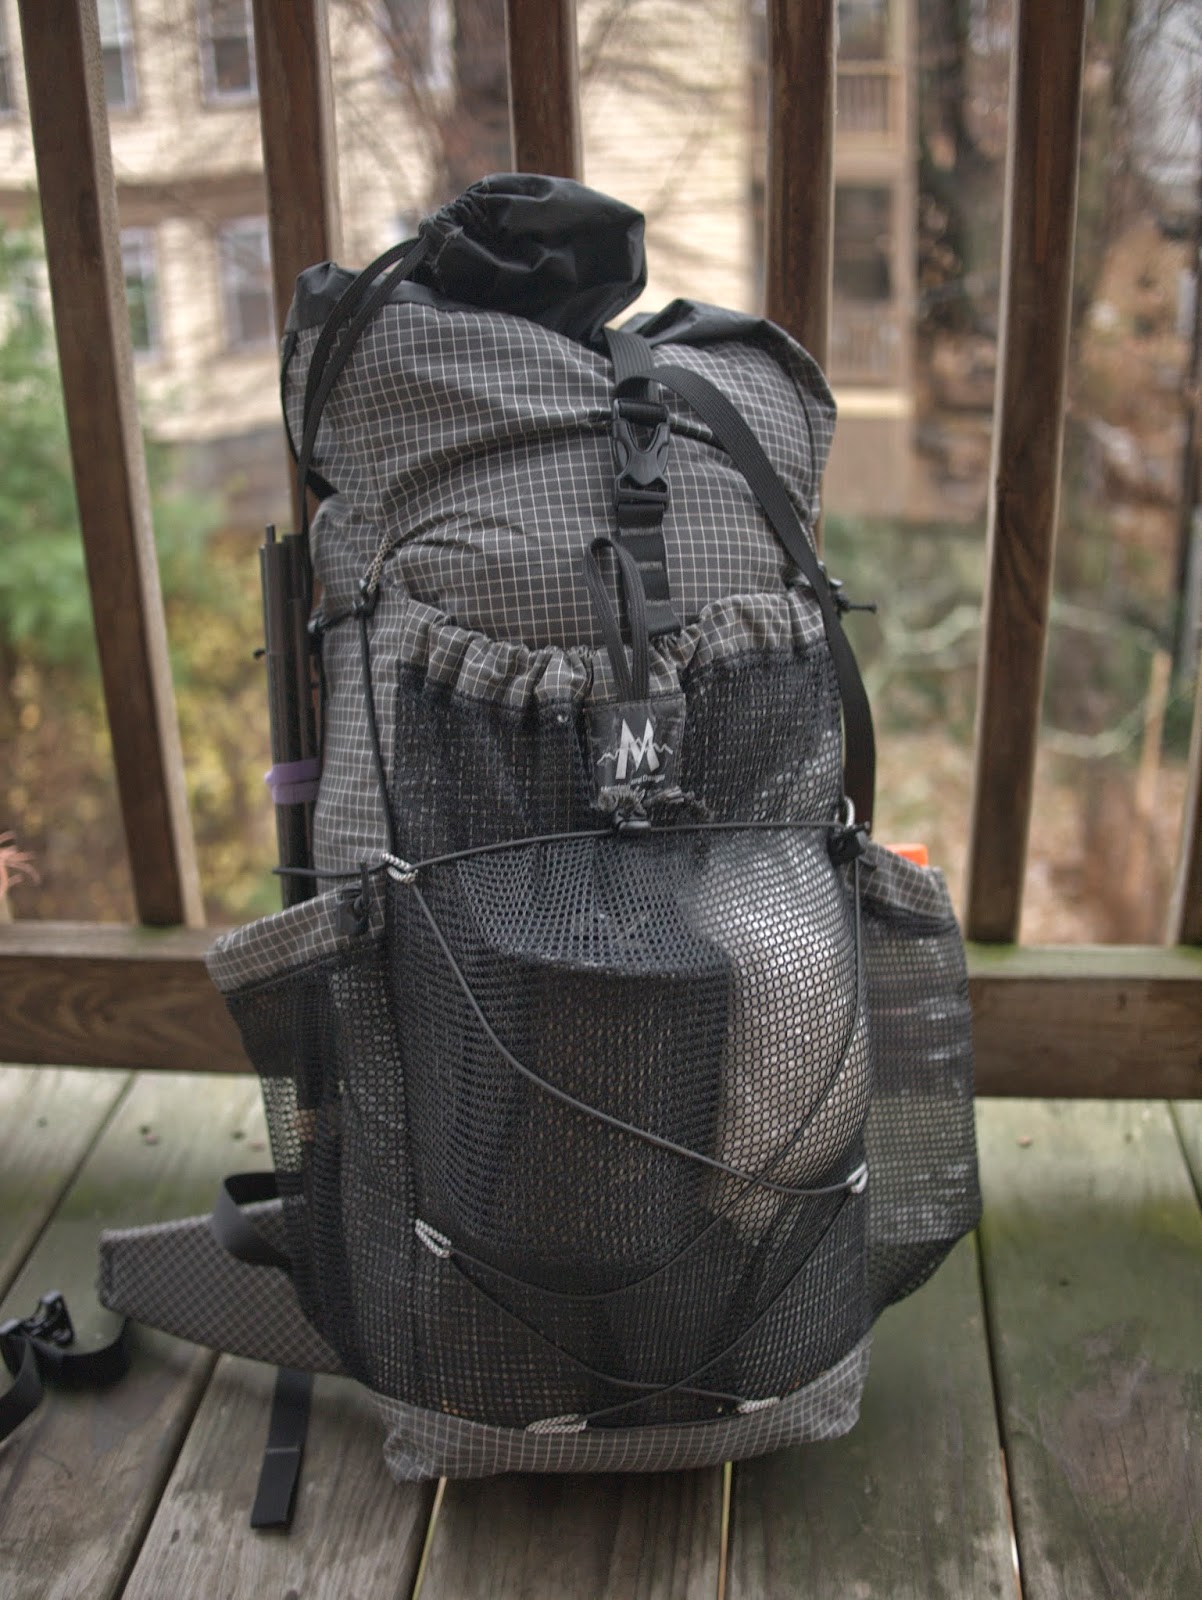 The Uncalculated Life: Mountain Laurel Designs Burn Backpack Review